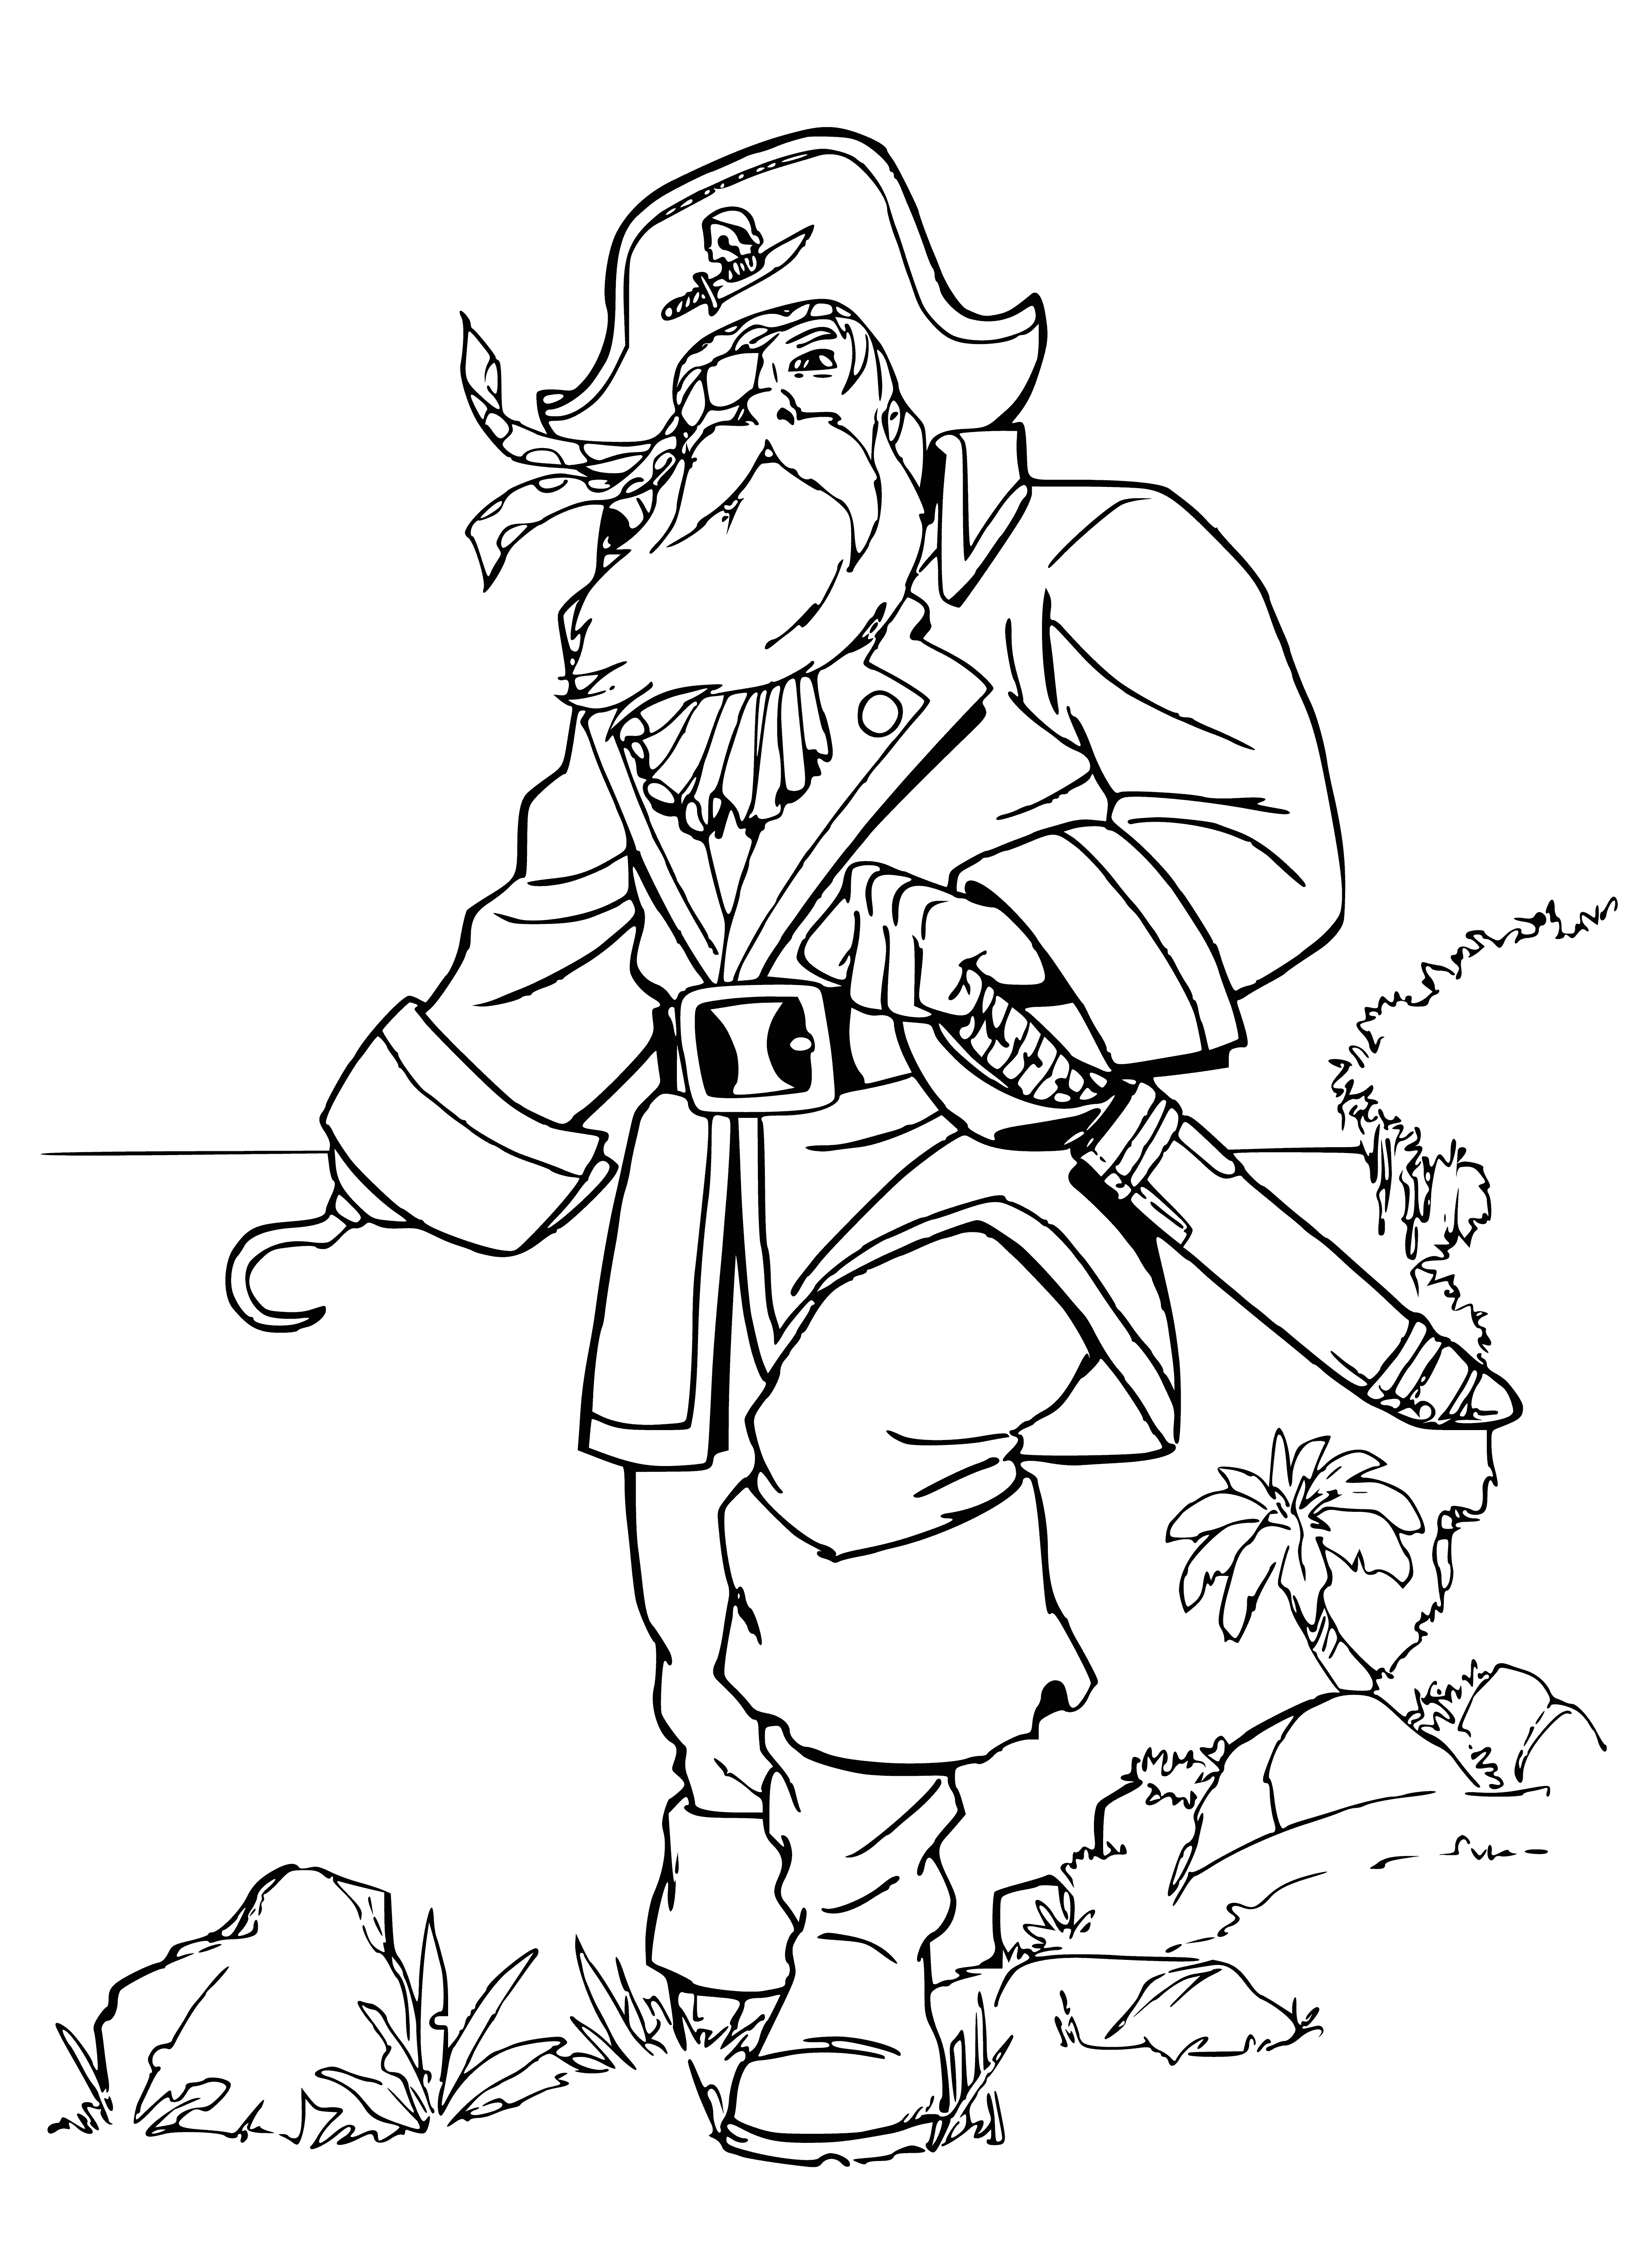 Sea robber coloring page